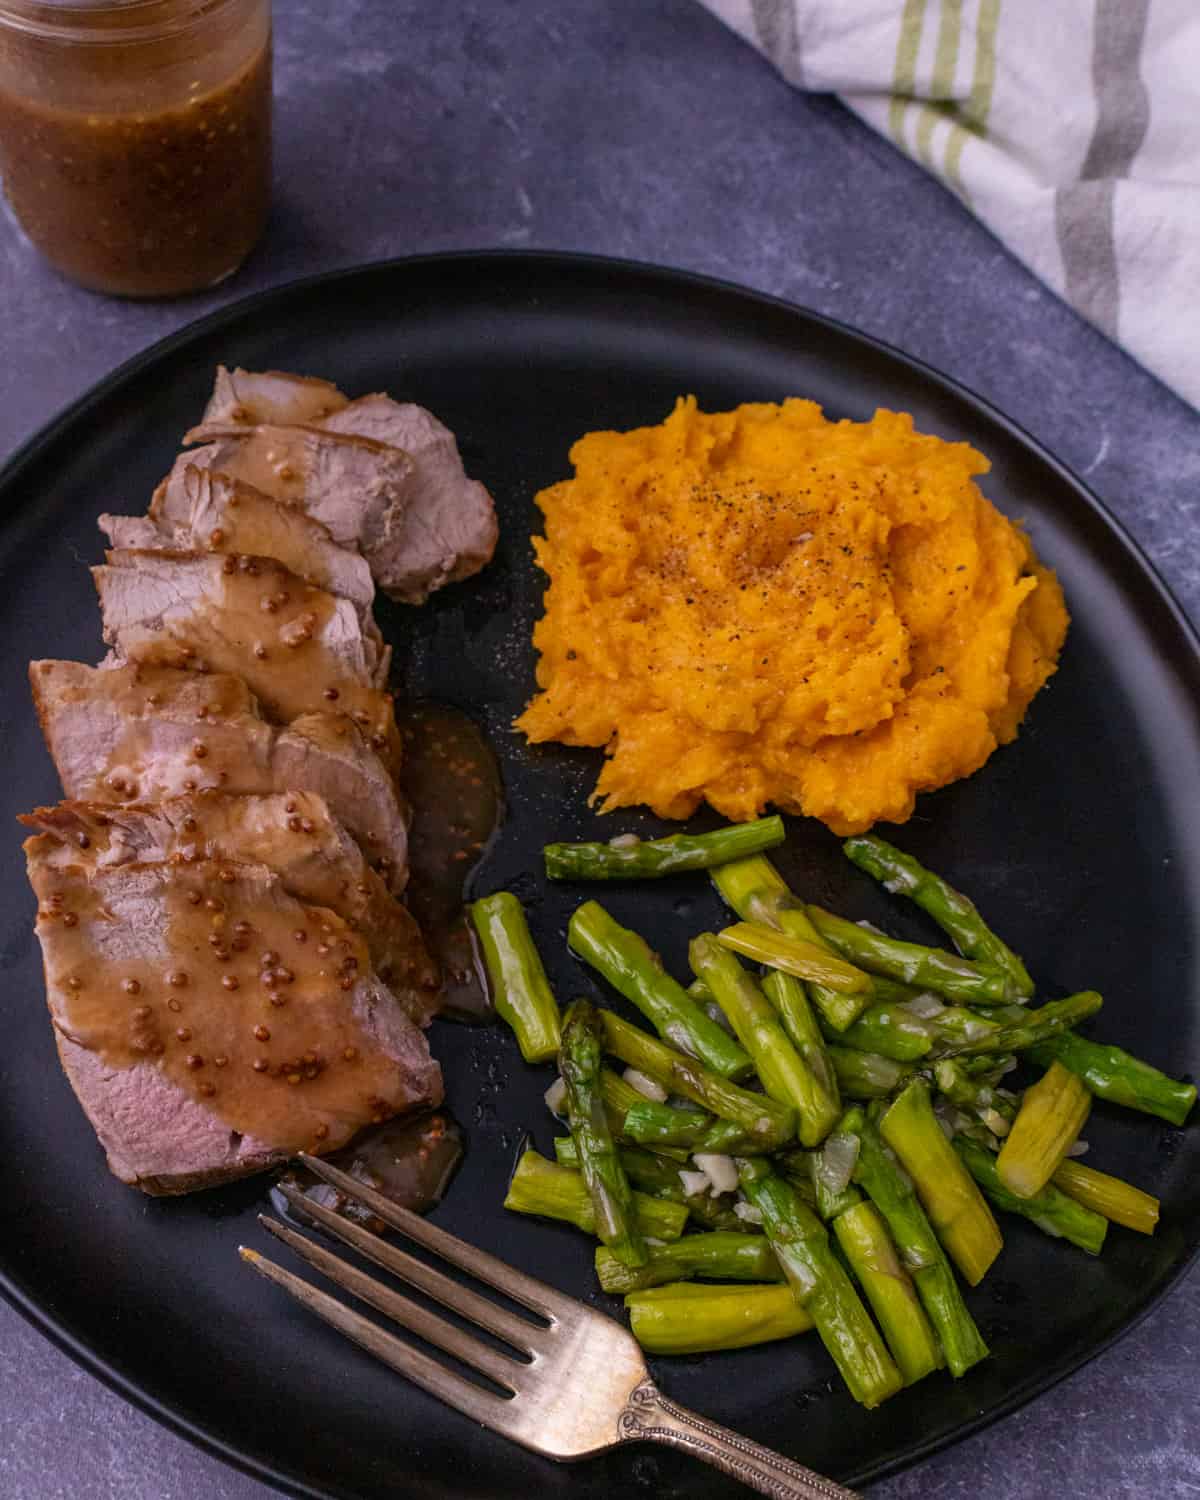 Sliced pork tenderloin with sauce on a black plate with mashed butternut squash, asparagus and a fork.